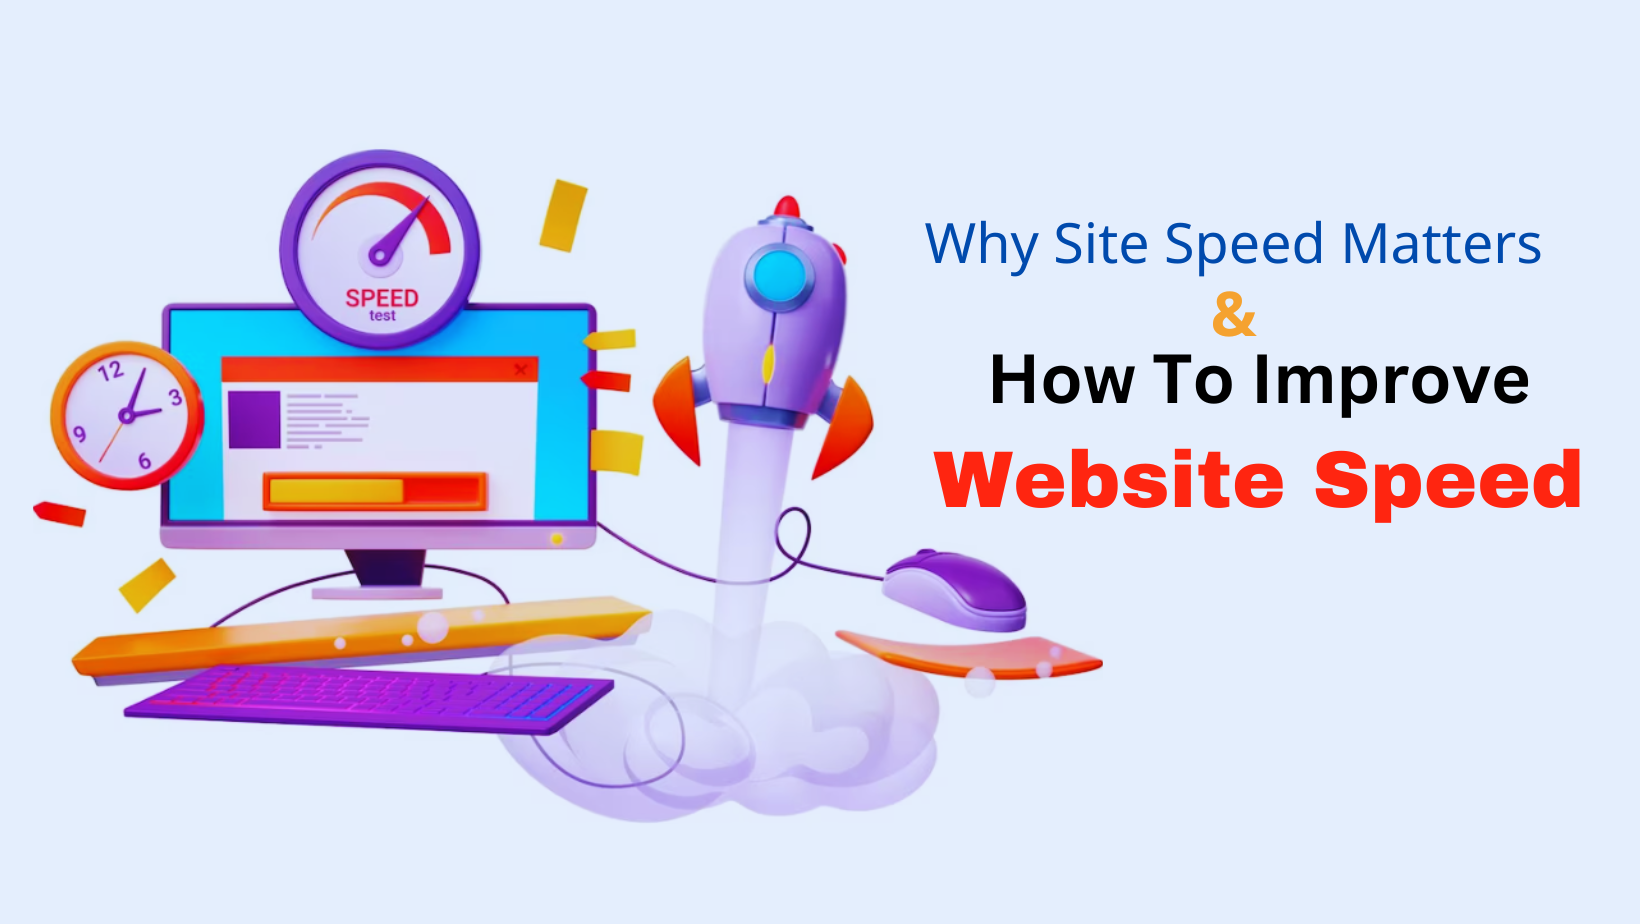 Why Site Speed Matters & Tips to Improve Site Speed